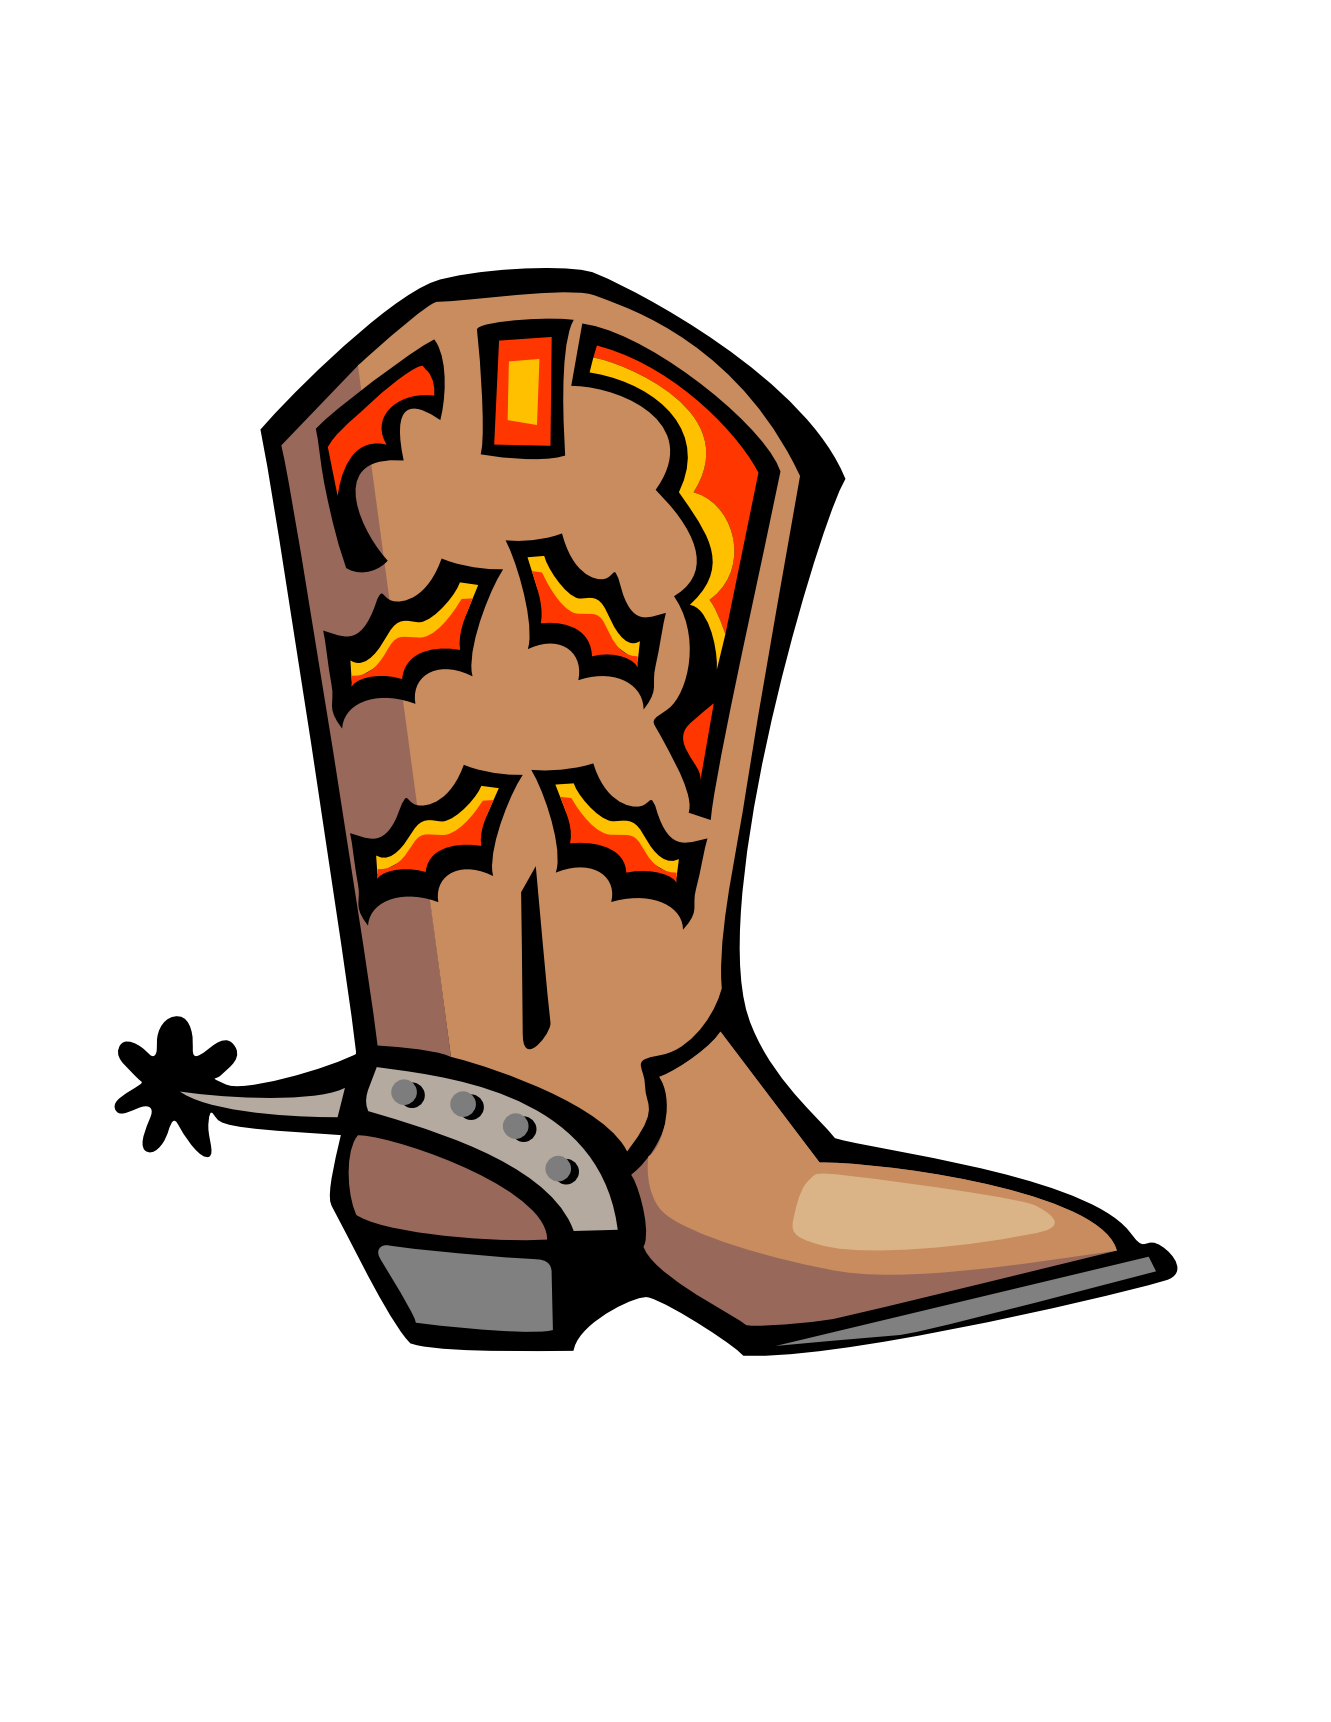 Free Cowboy Boot Images, Download Free Cowboy Boot Images png images